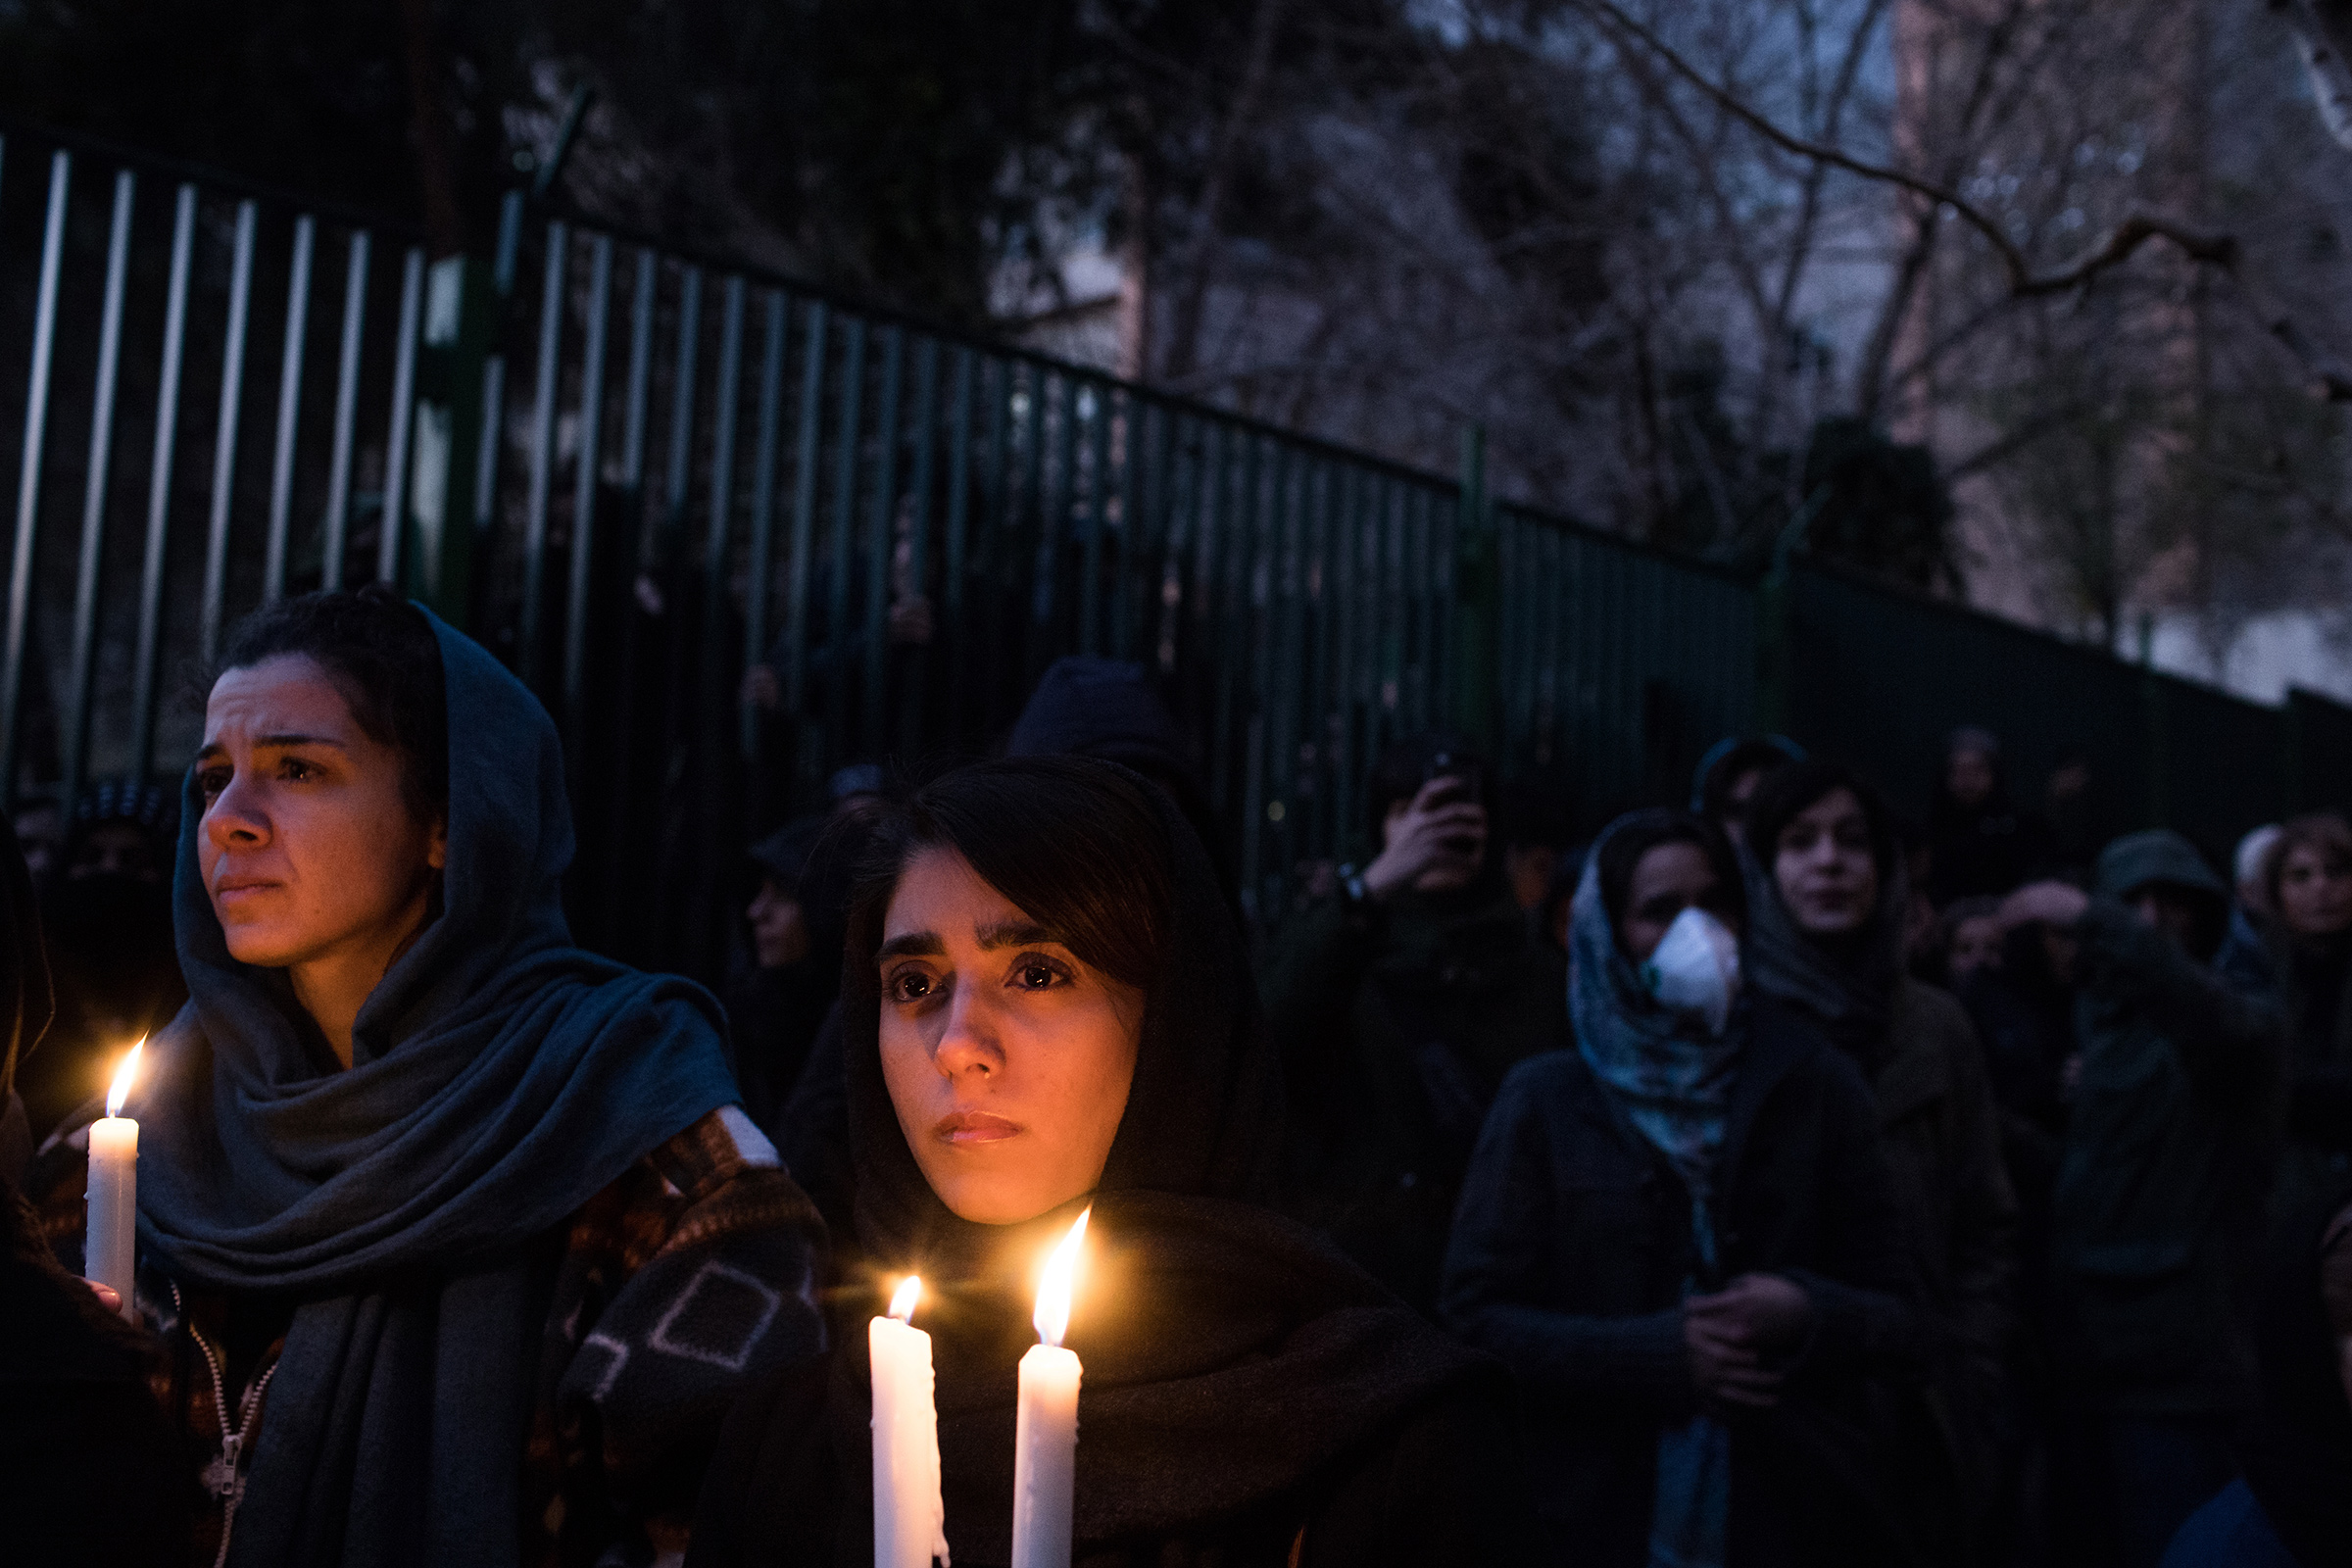 Demonstrators at a vigil in Tehran on Jan. 11 mourn victims of a plane crash caused by Iran’s military (Adil Hussain Bhat—Polaris)